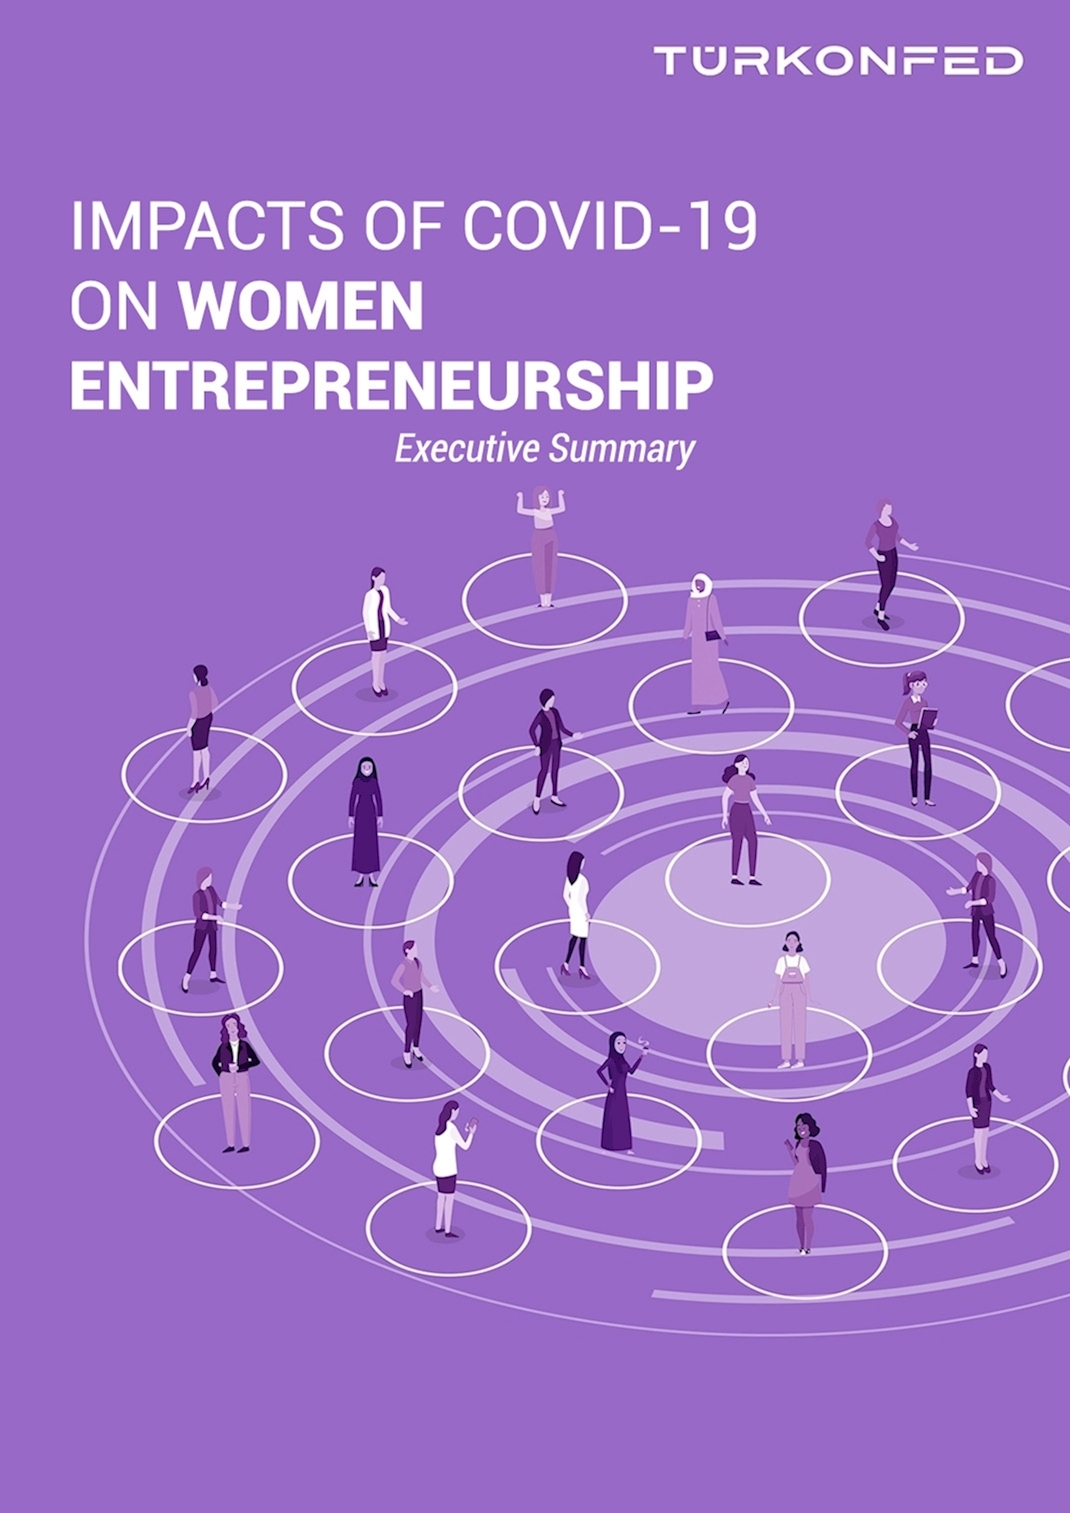 Report On The Effects Of Covid-19 On Women Entrepreneurship